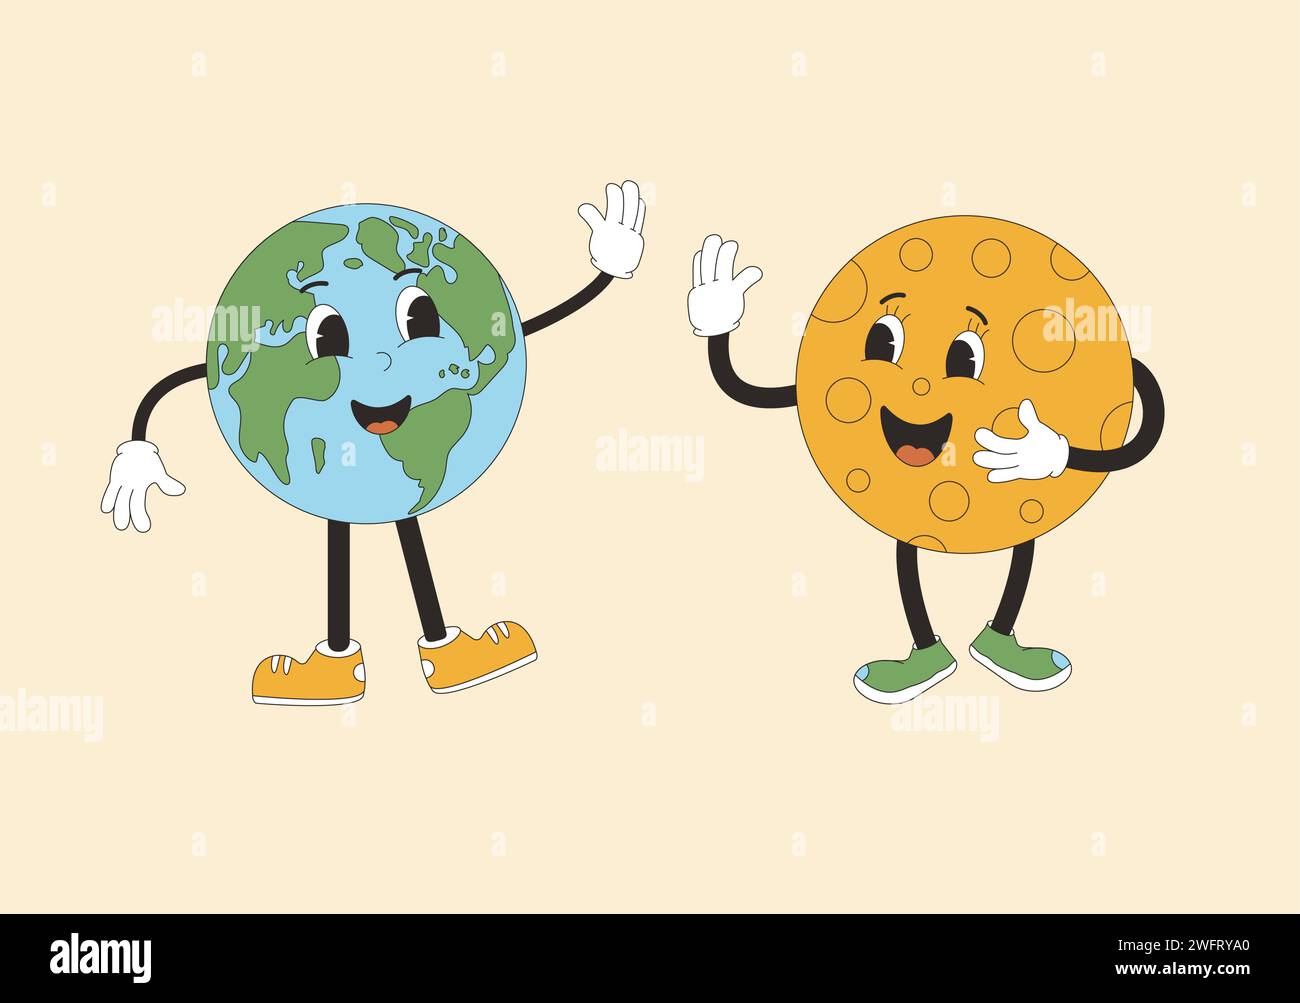 Moon and Earth cartoon characters give five each other in retro style. Smiling comic characters waving their hands. Vector illustration. Stock Vector